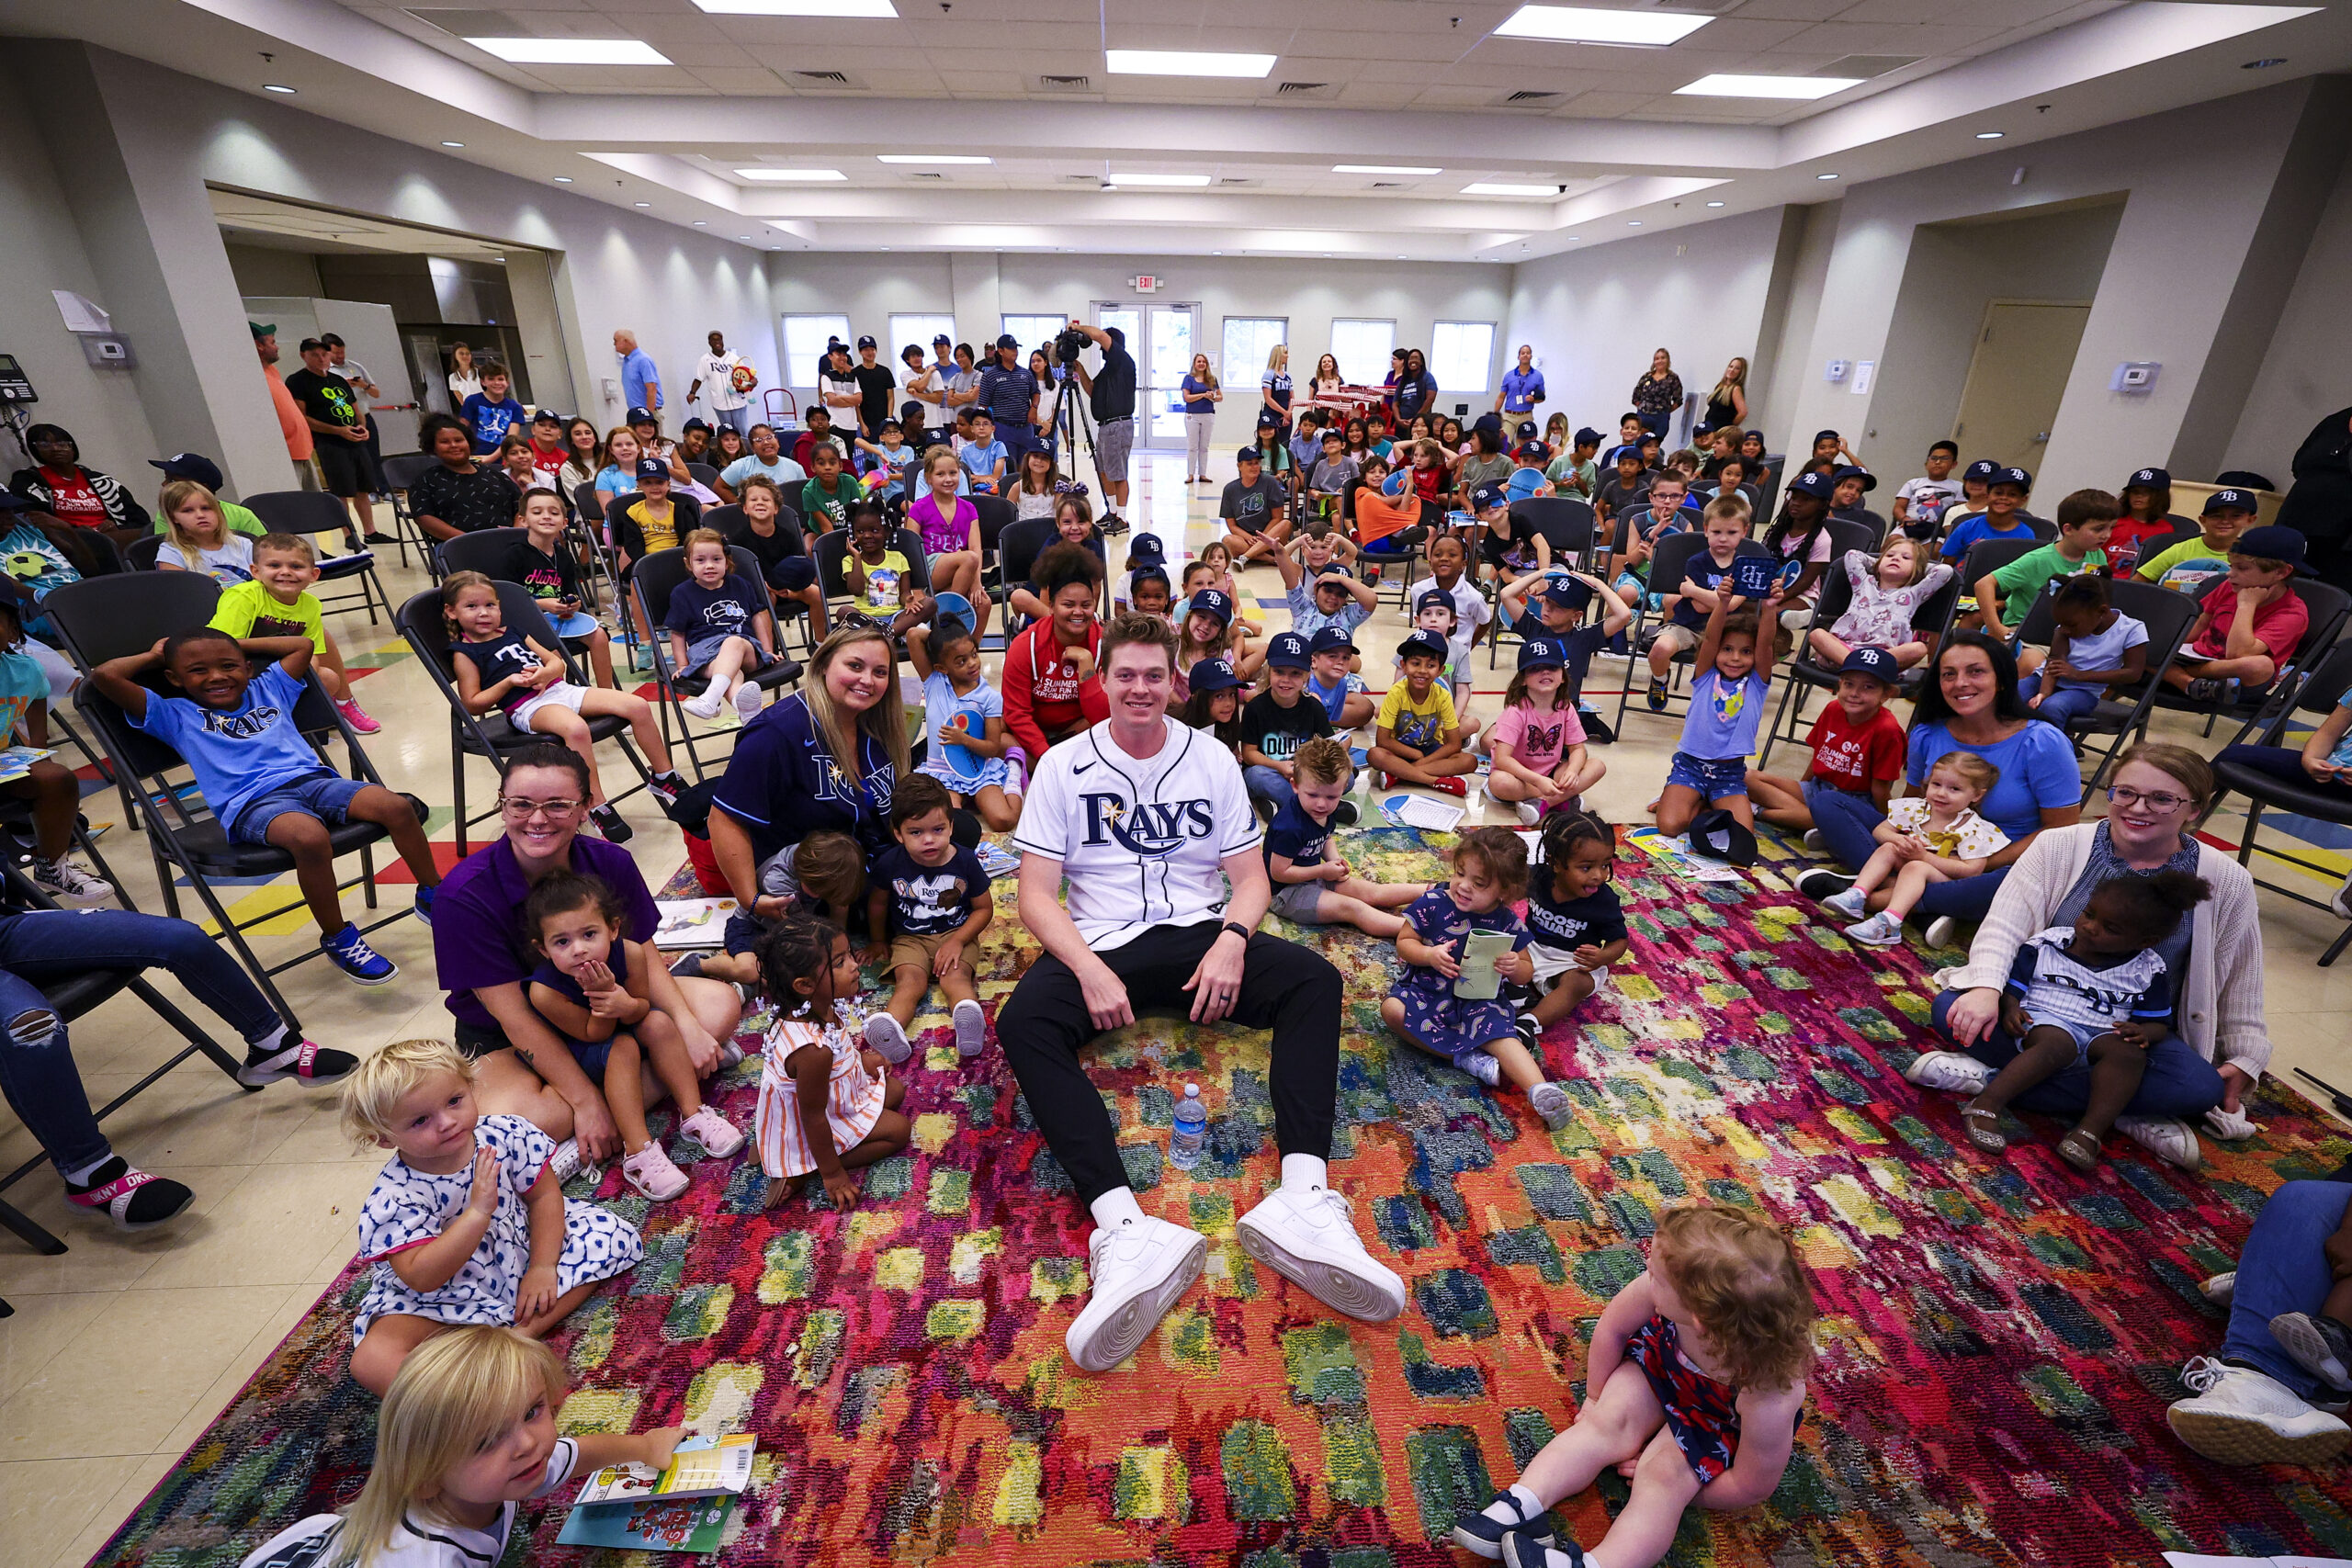 Summer Reading For Kids With Tampa Bay Rays Program